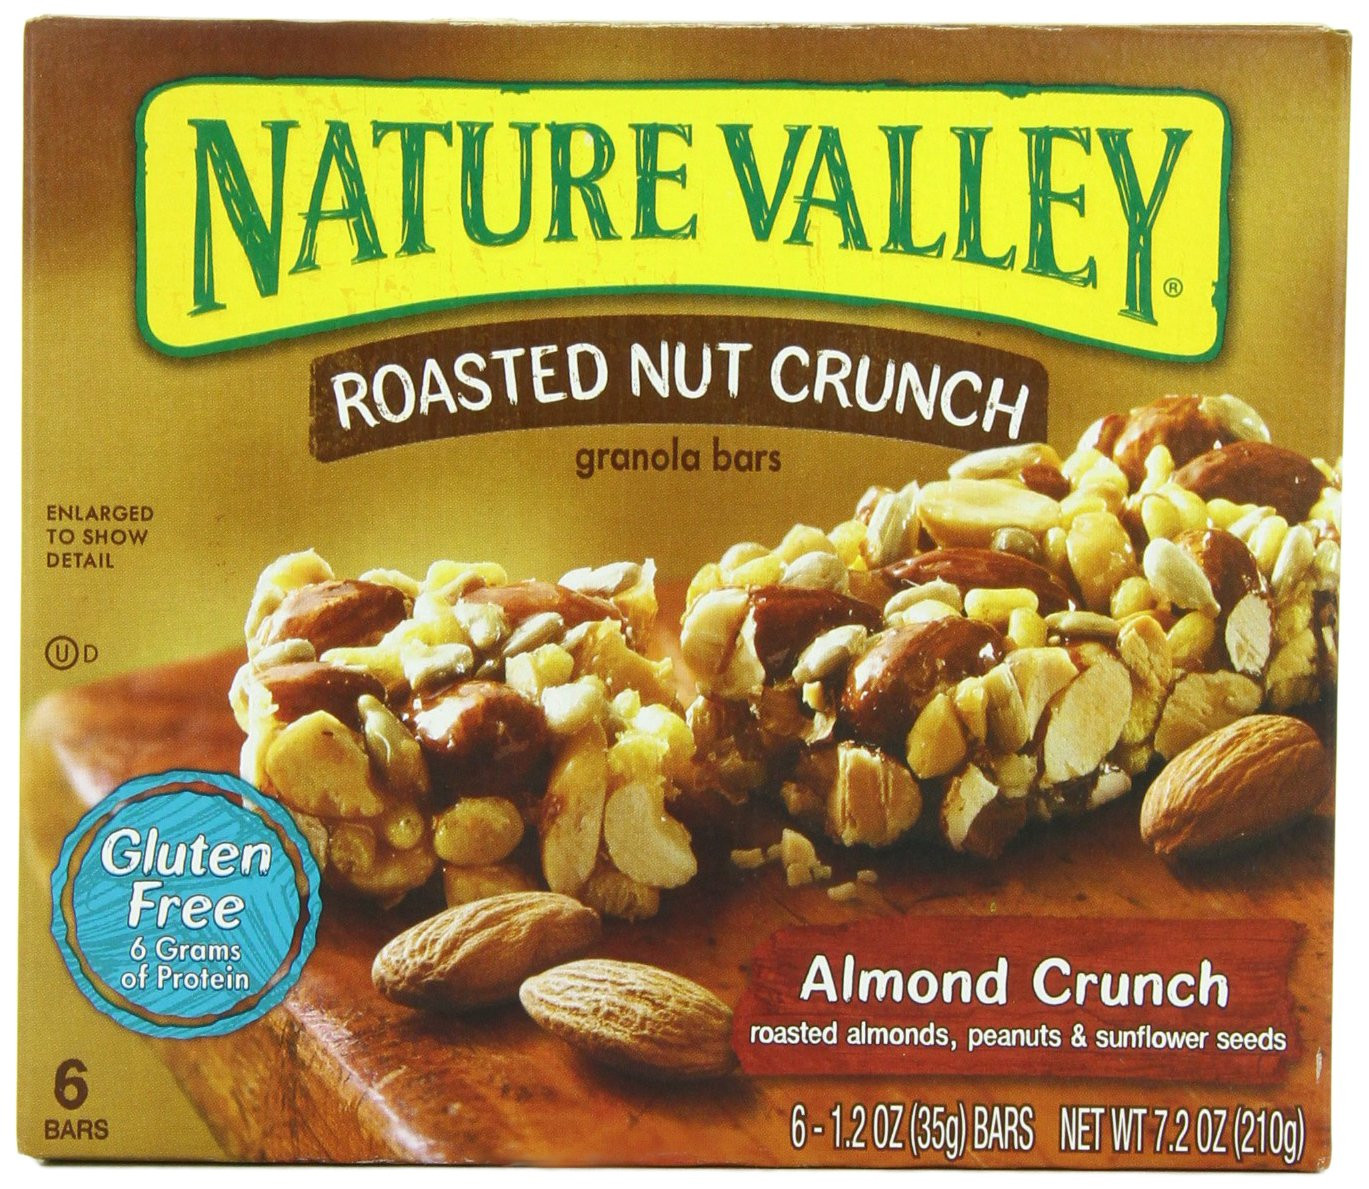 Nature Valley Oats And Honey Gluten Free
 nature valley crunchy granola bars oats n honey gluten free